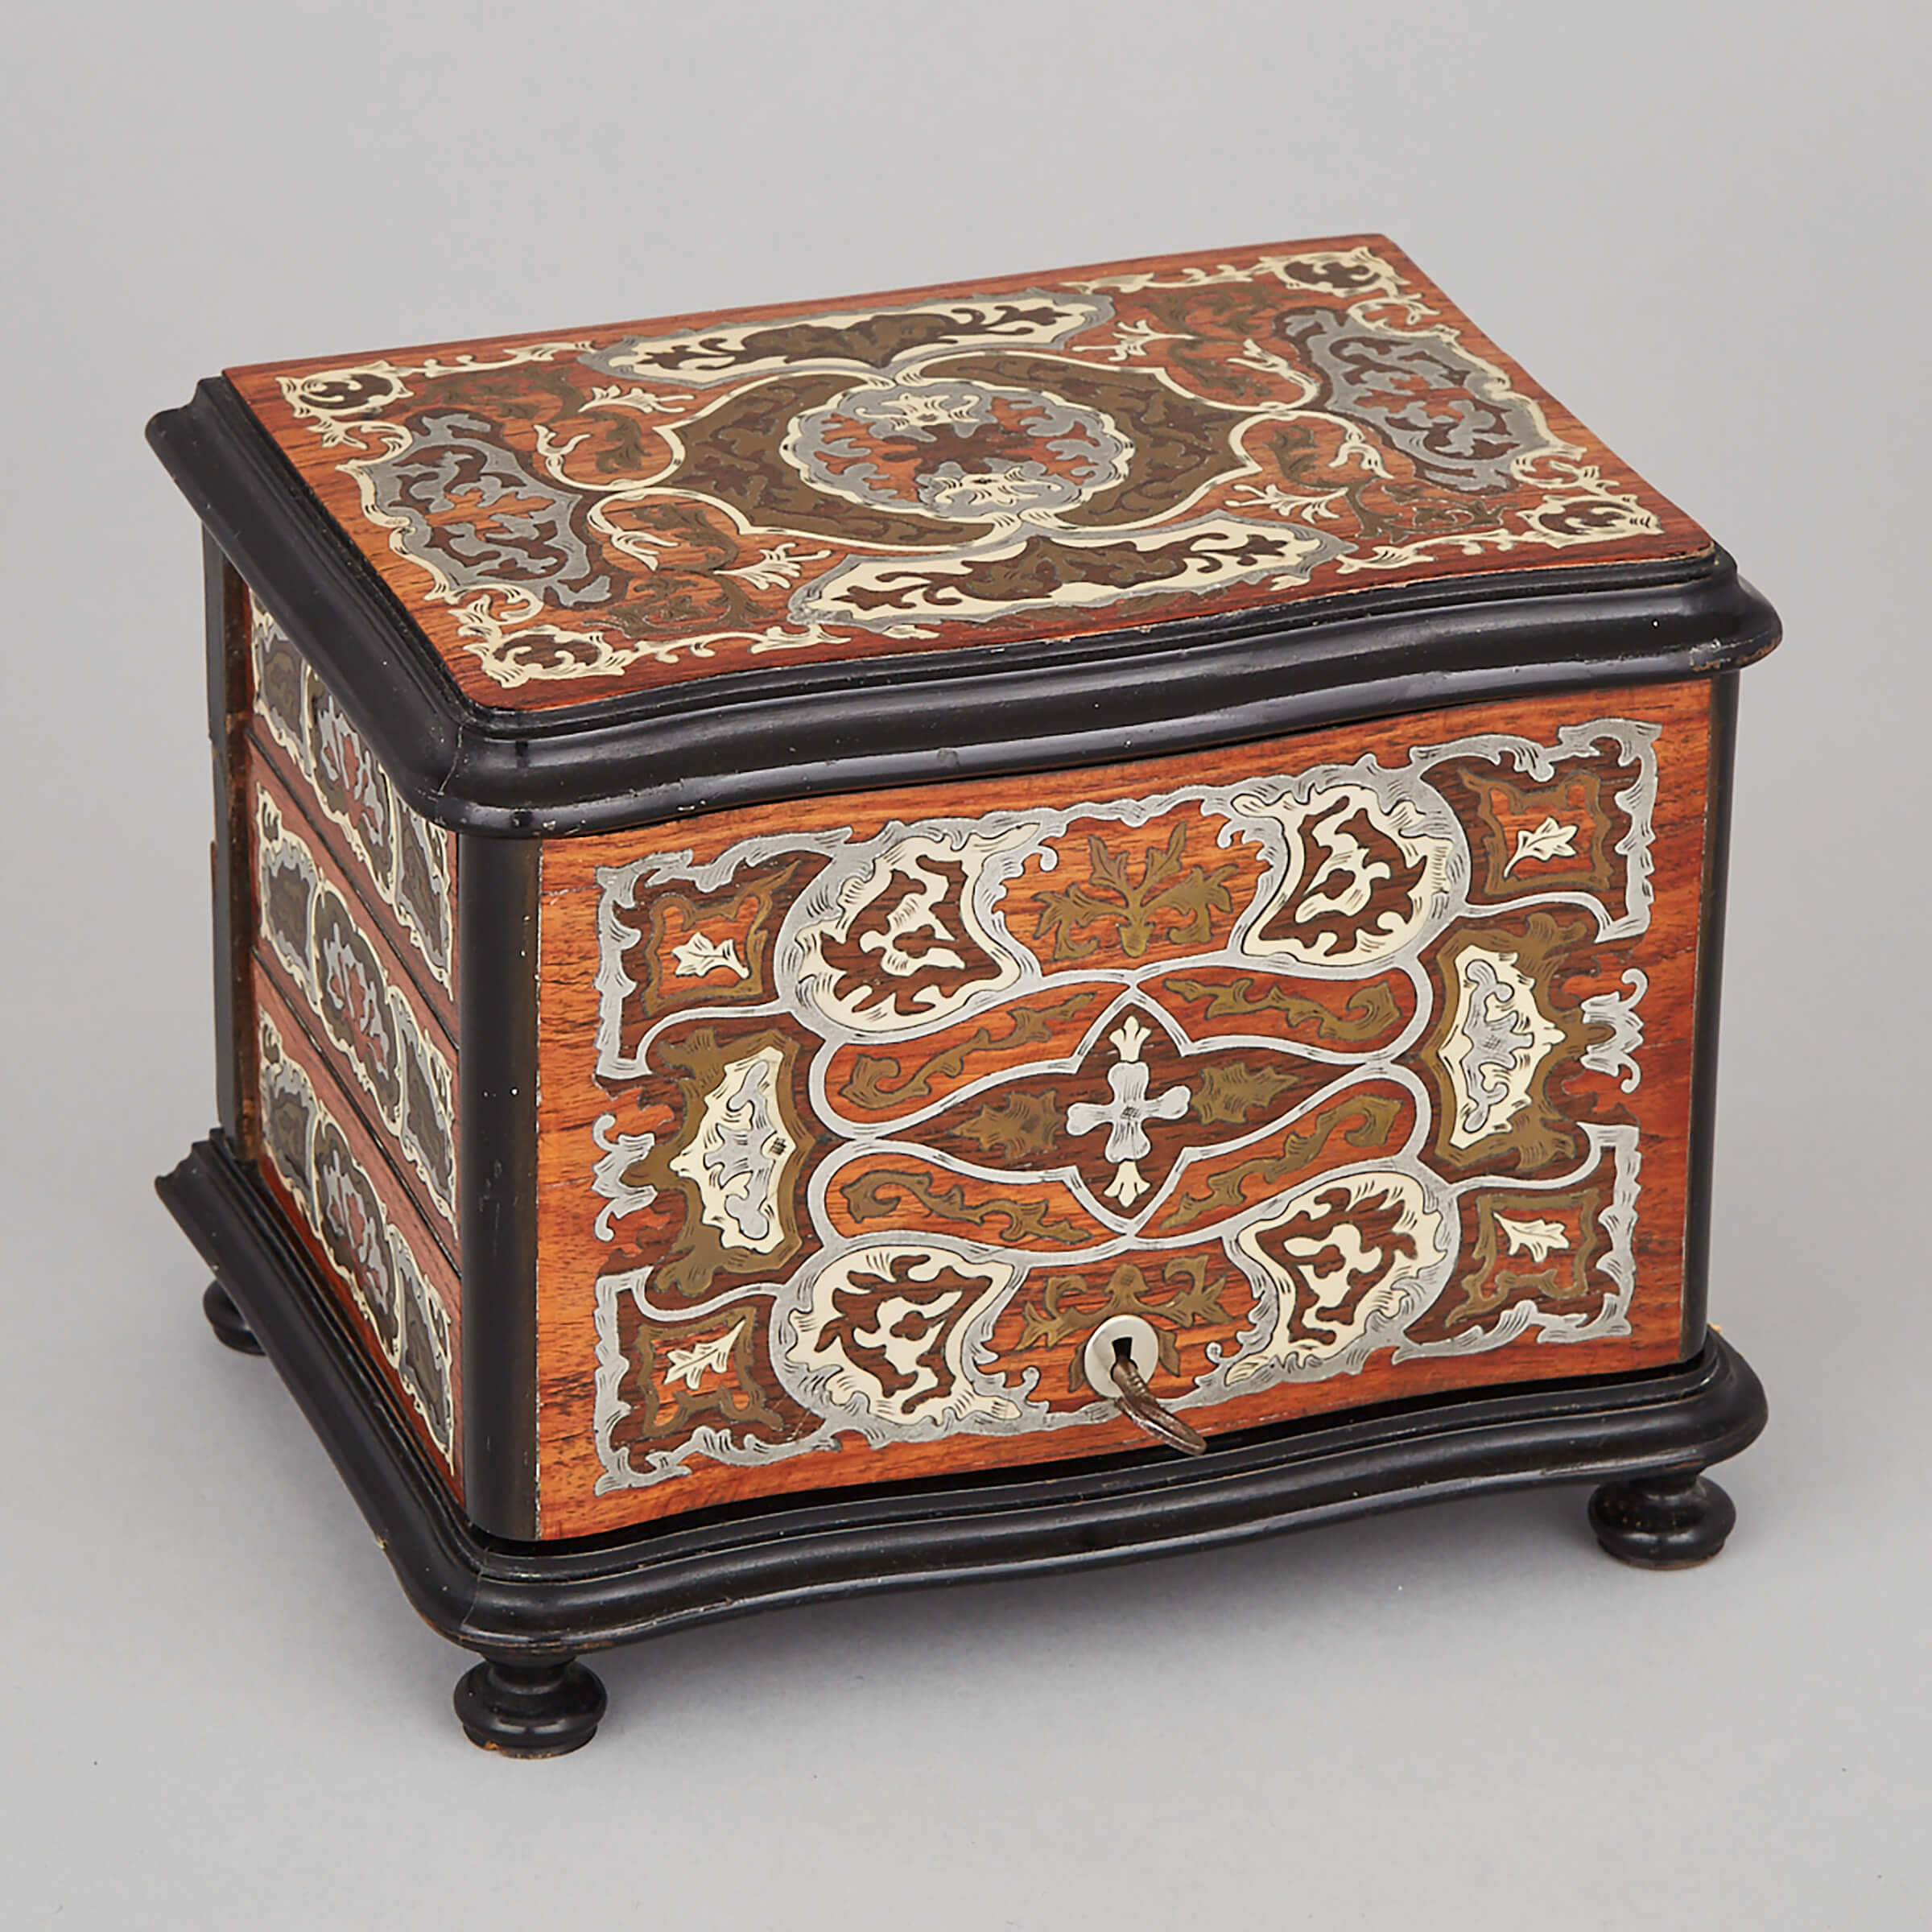 Napoleon III Silver, Brass and French Ivory Inlaid and Ebonized Jewellery Casket, late 19th century